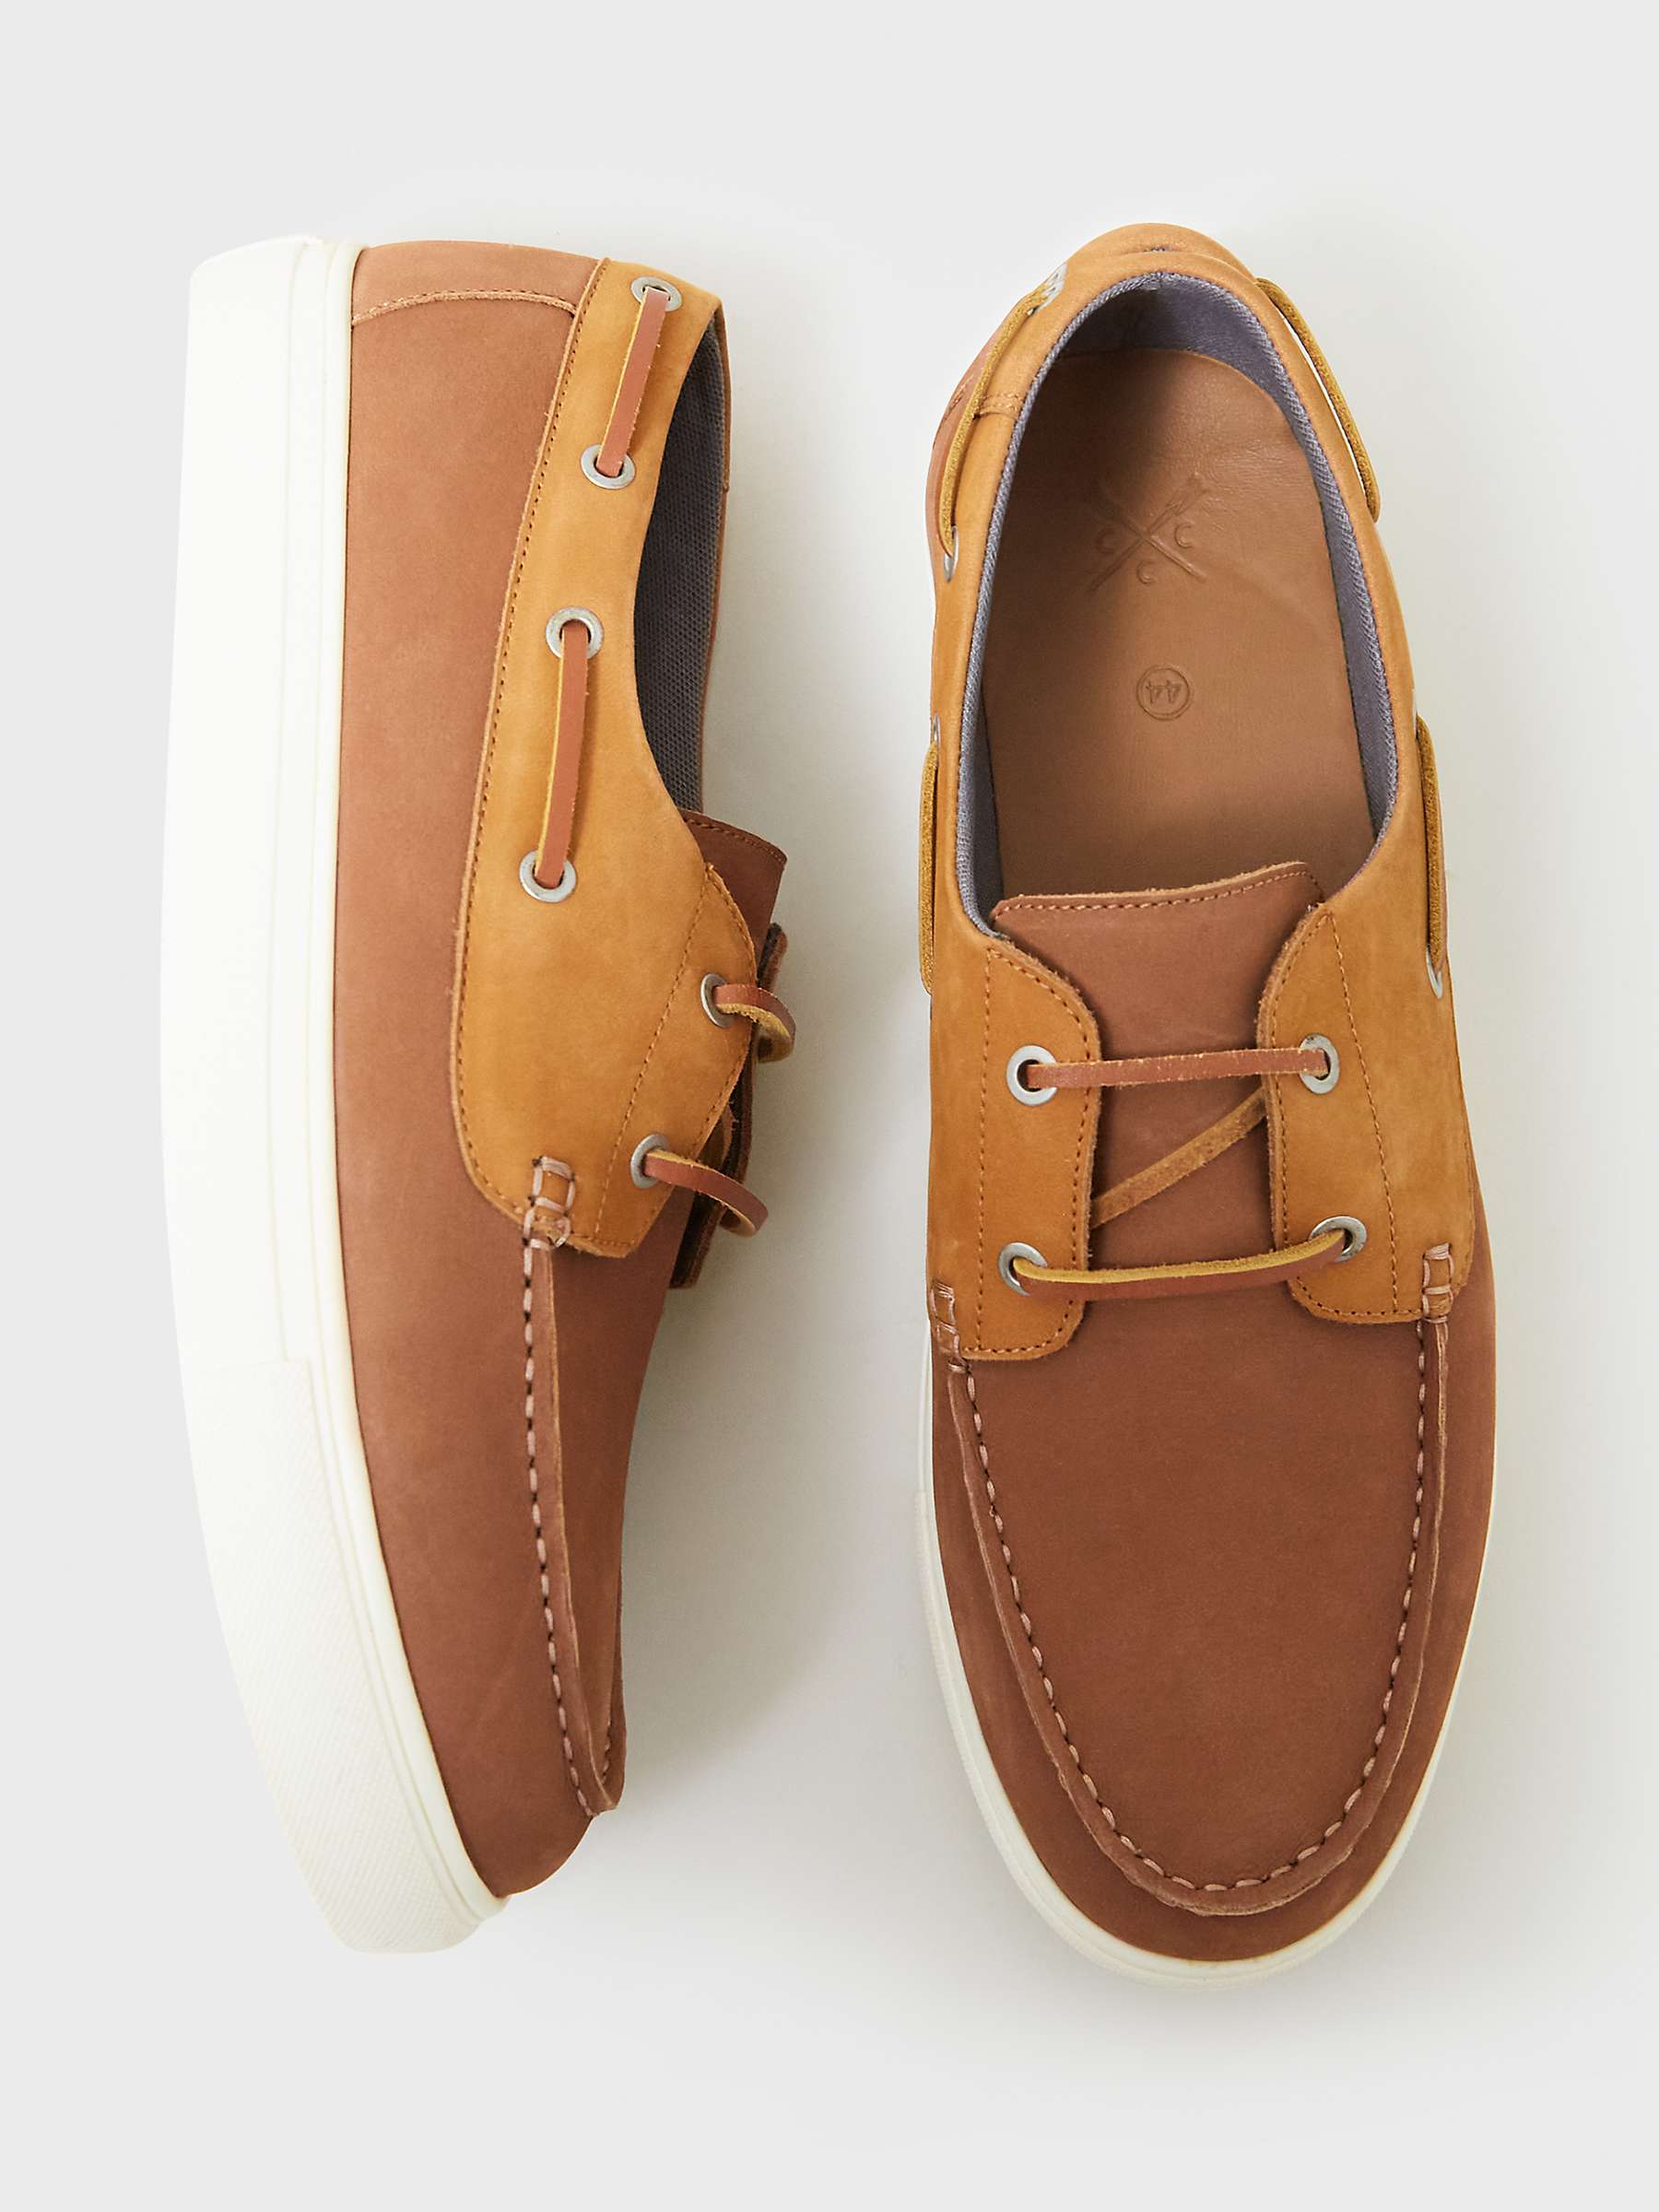 Buy Crew Clothing Hybrid Deck Shoes, Brown Online at johnlewis.com